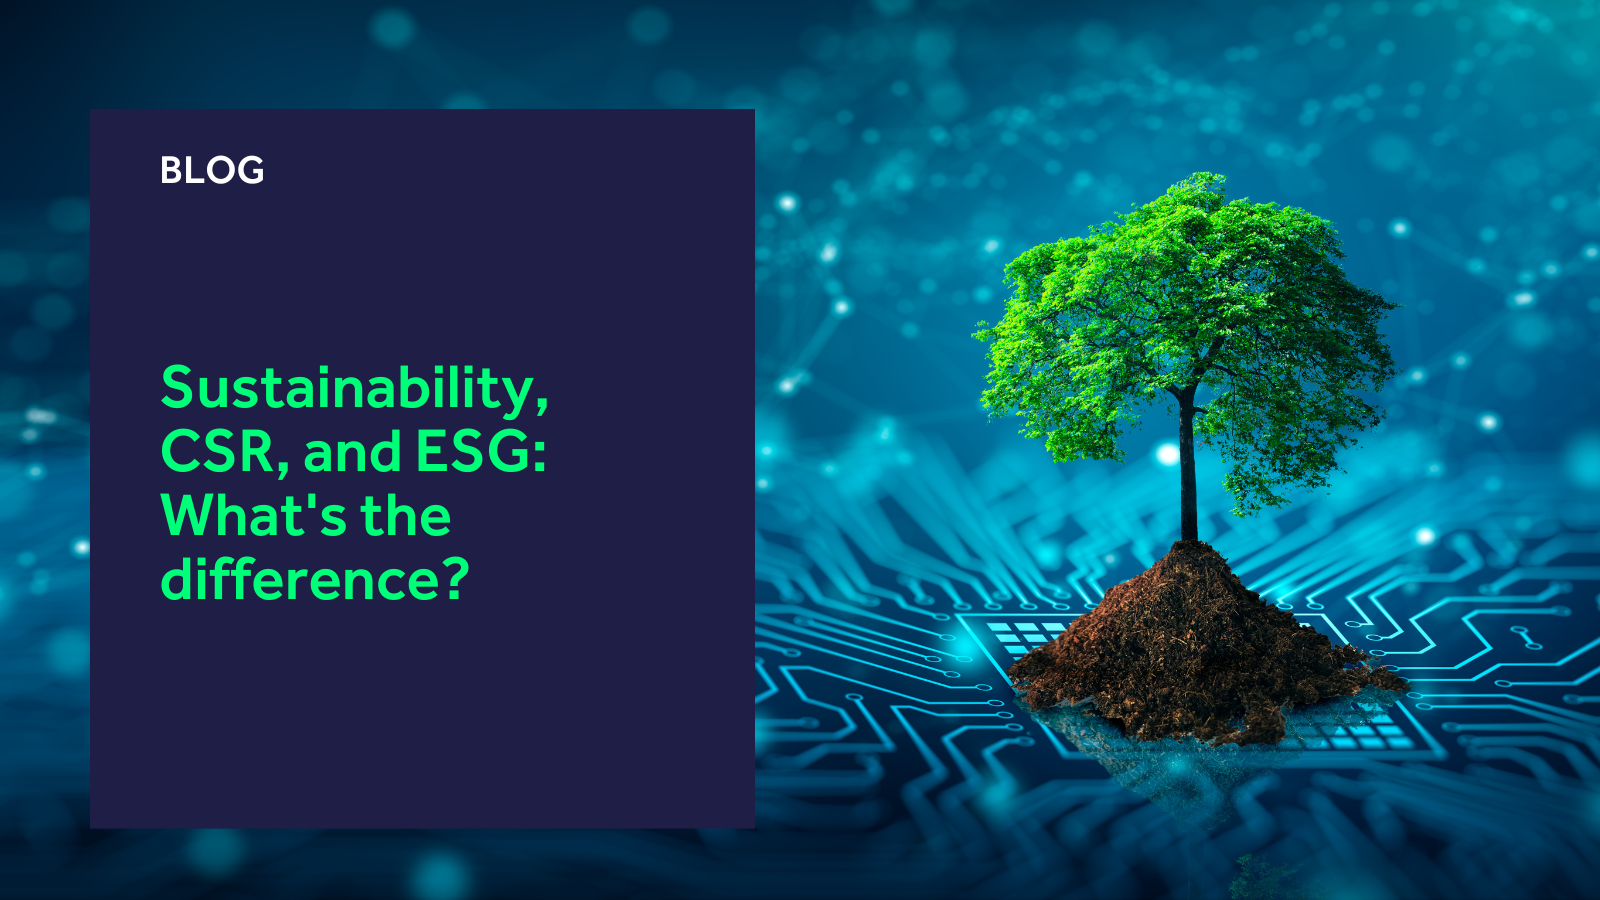 Sustainability, CSR, and ESG: What's the difference?